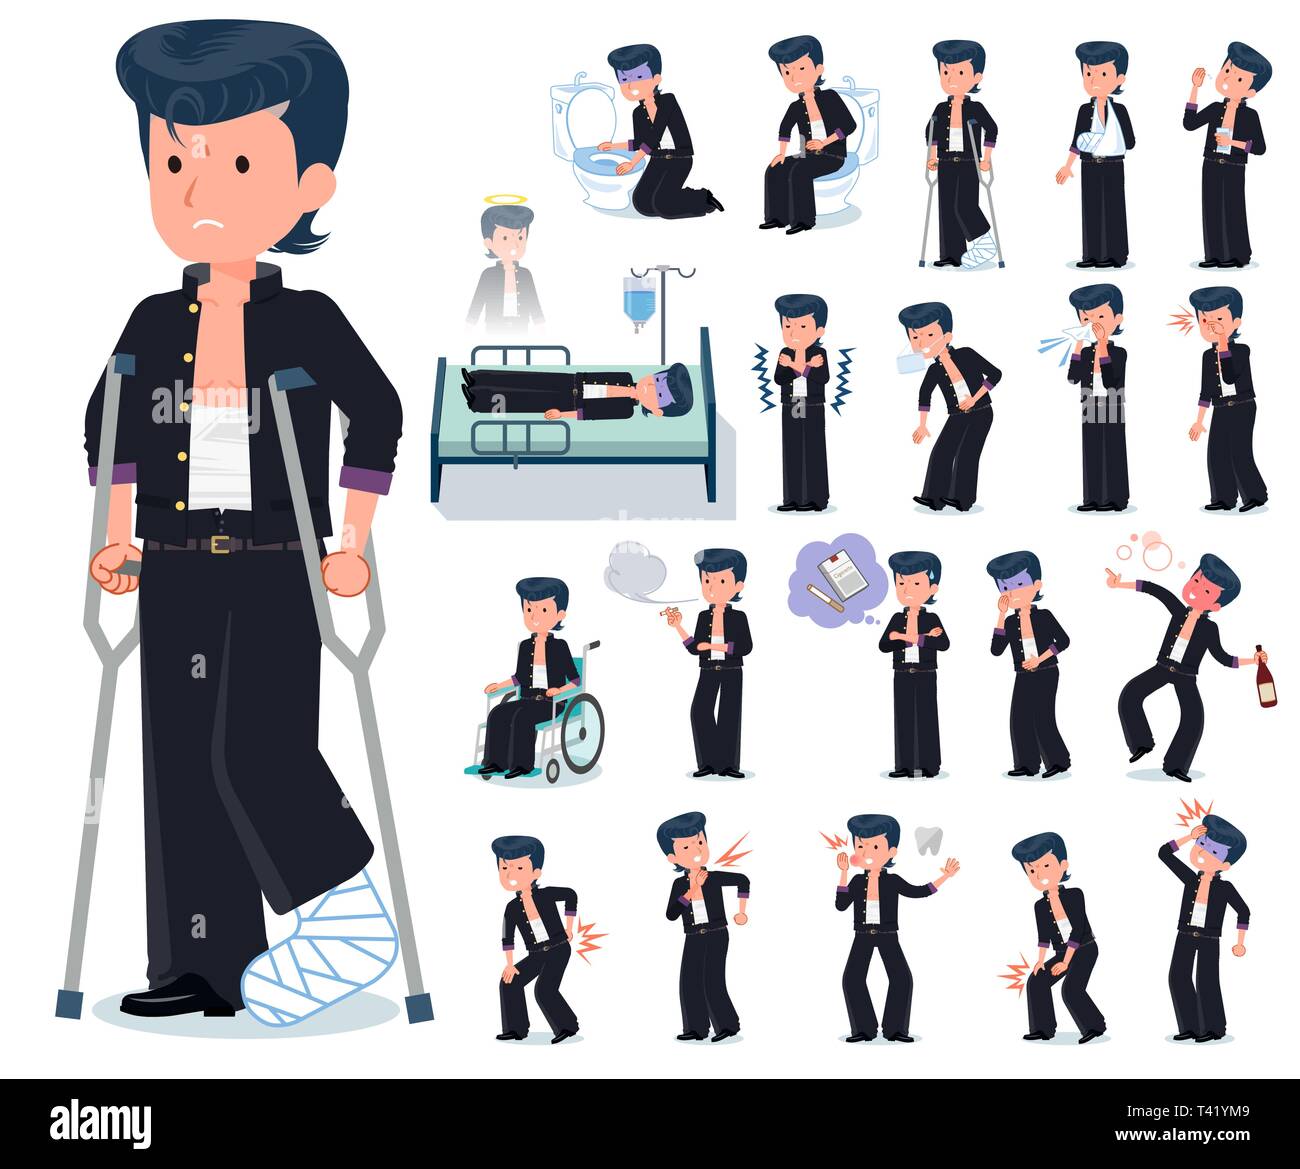 Bad boy student with injury and illness.There are actions that express dependence and death.It's vector art so it's easy to edit. Stock Vector